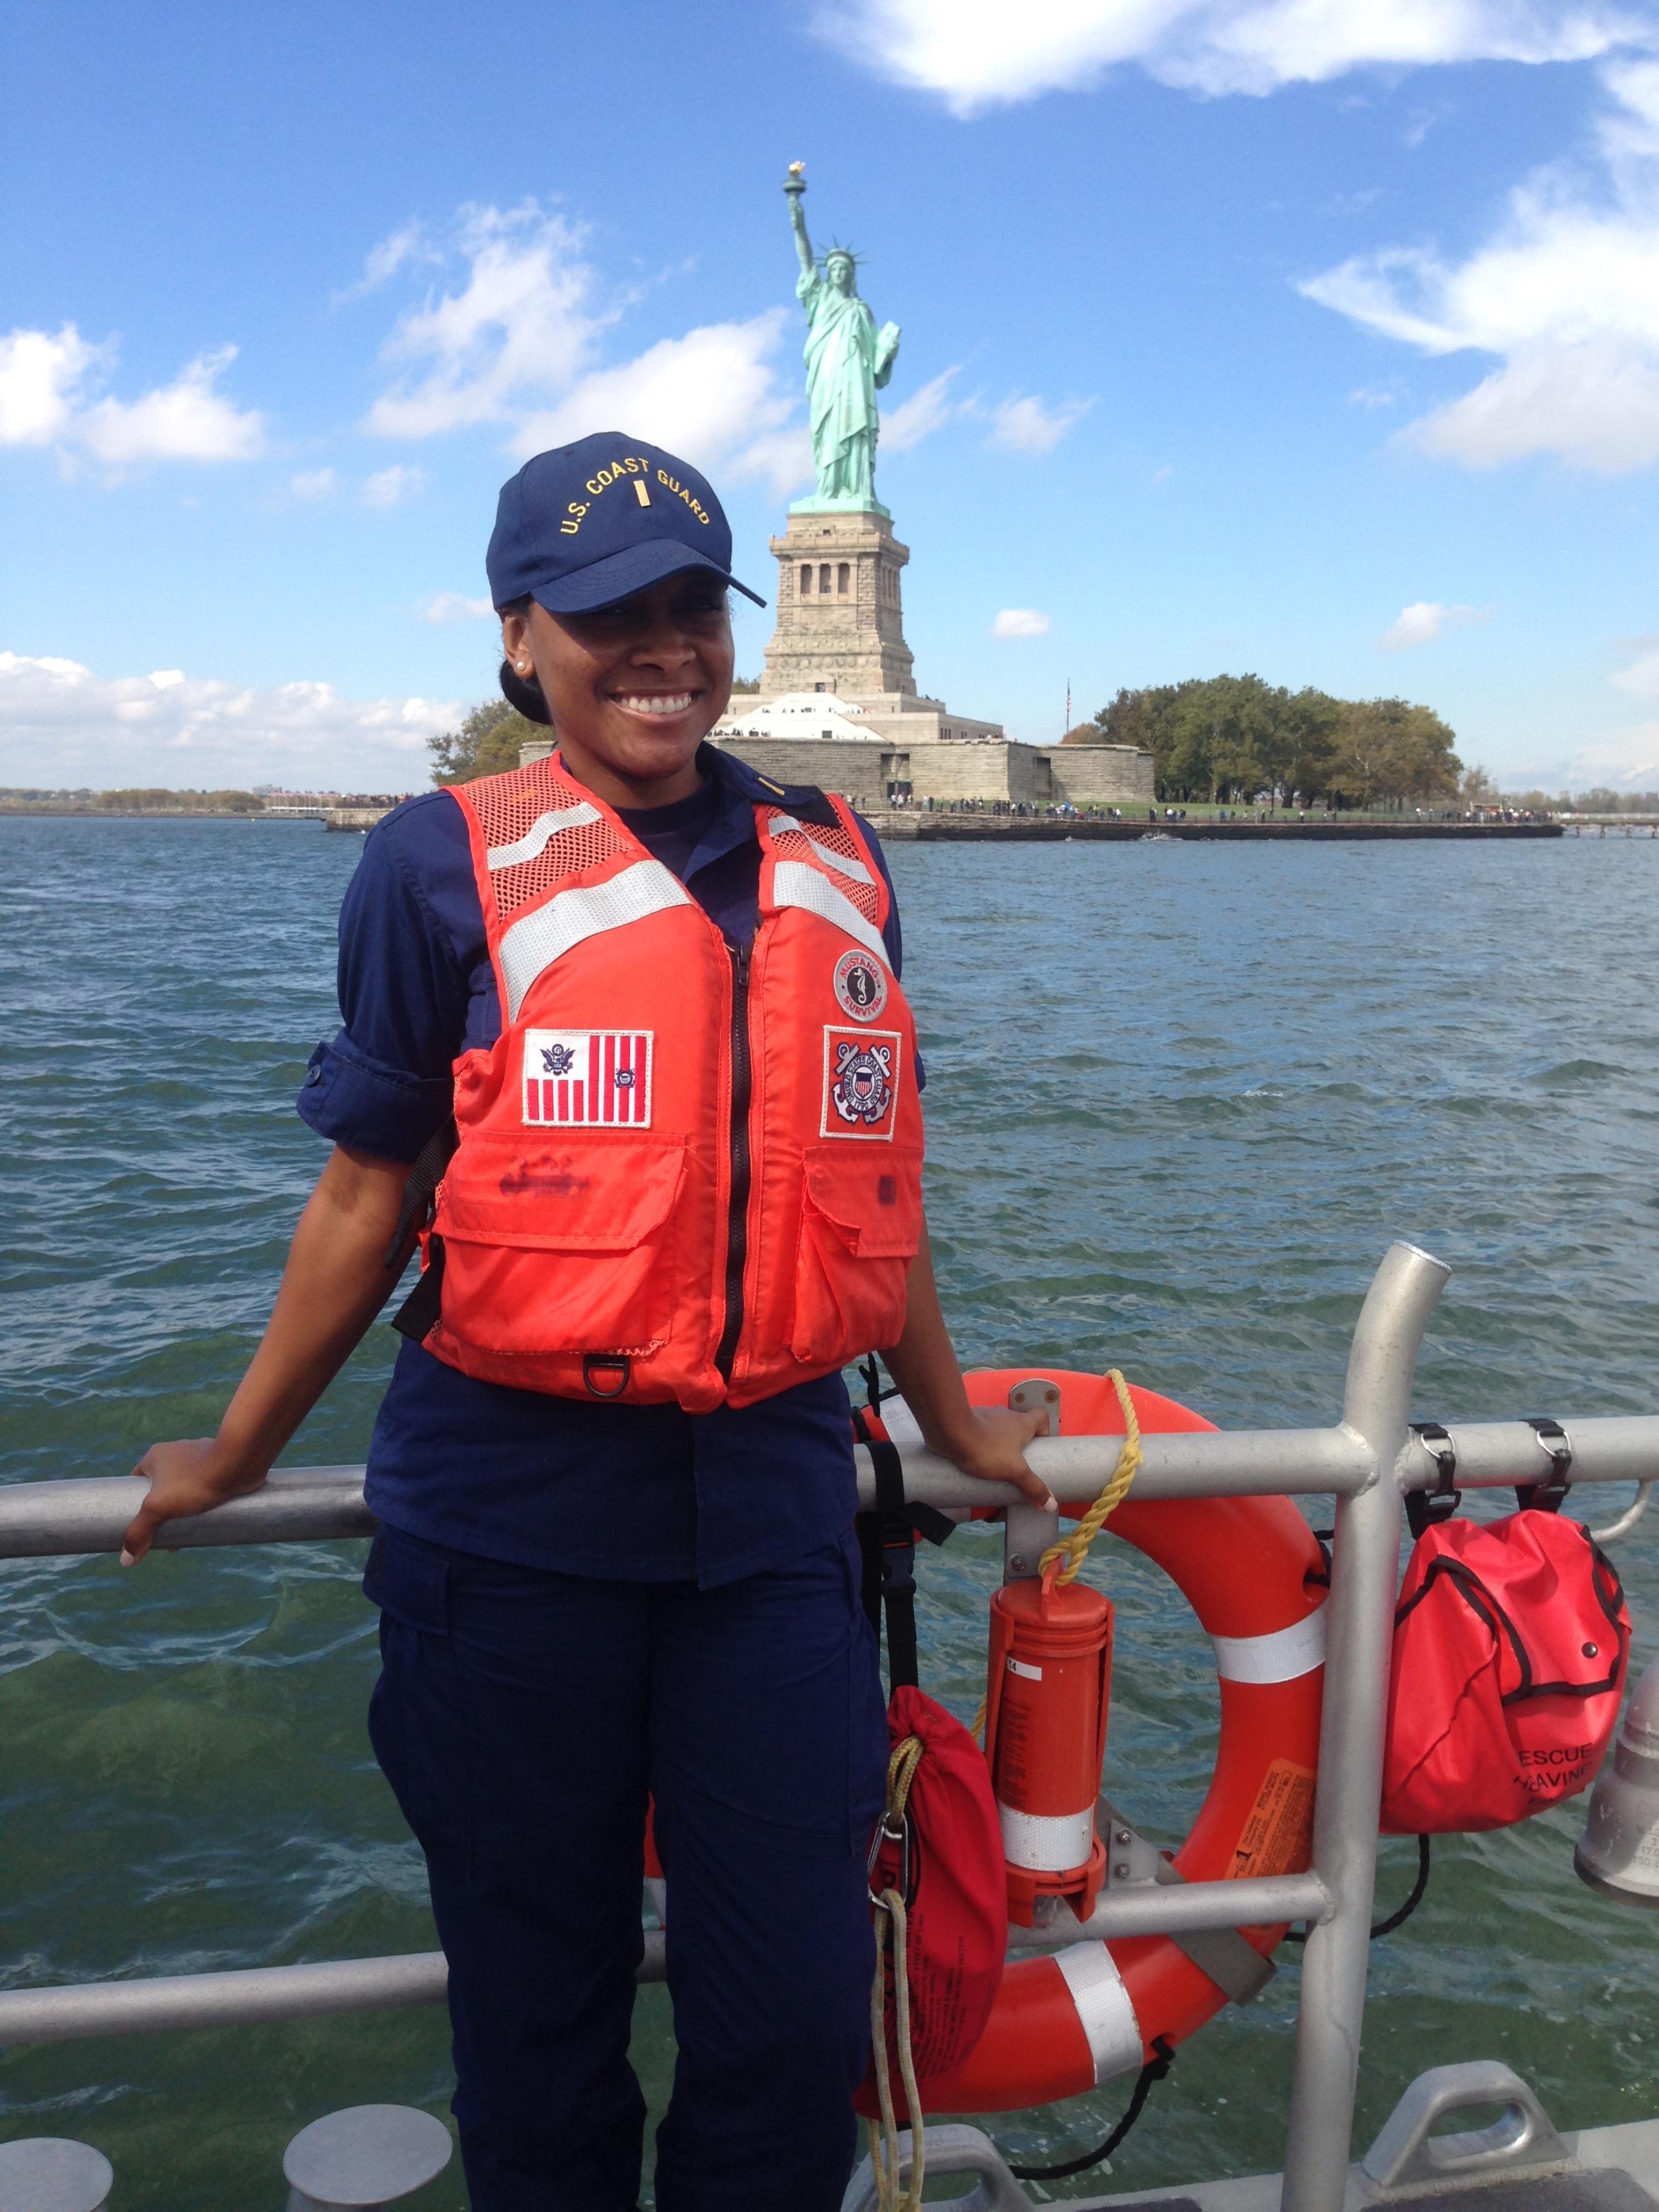 NEW YORK - Ens. Kelly Relf stands on the back of a 45-foot medium response boat in front of the Statue of Liberty in New York Harbor, October 16, 2014. Now Lt. Relf took time Sept. 9, 2020, to interview Capt. Michael Day, who coordinated the Coast Guard's response during 9/11. (U.S. Coast Guard photo)